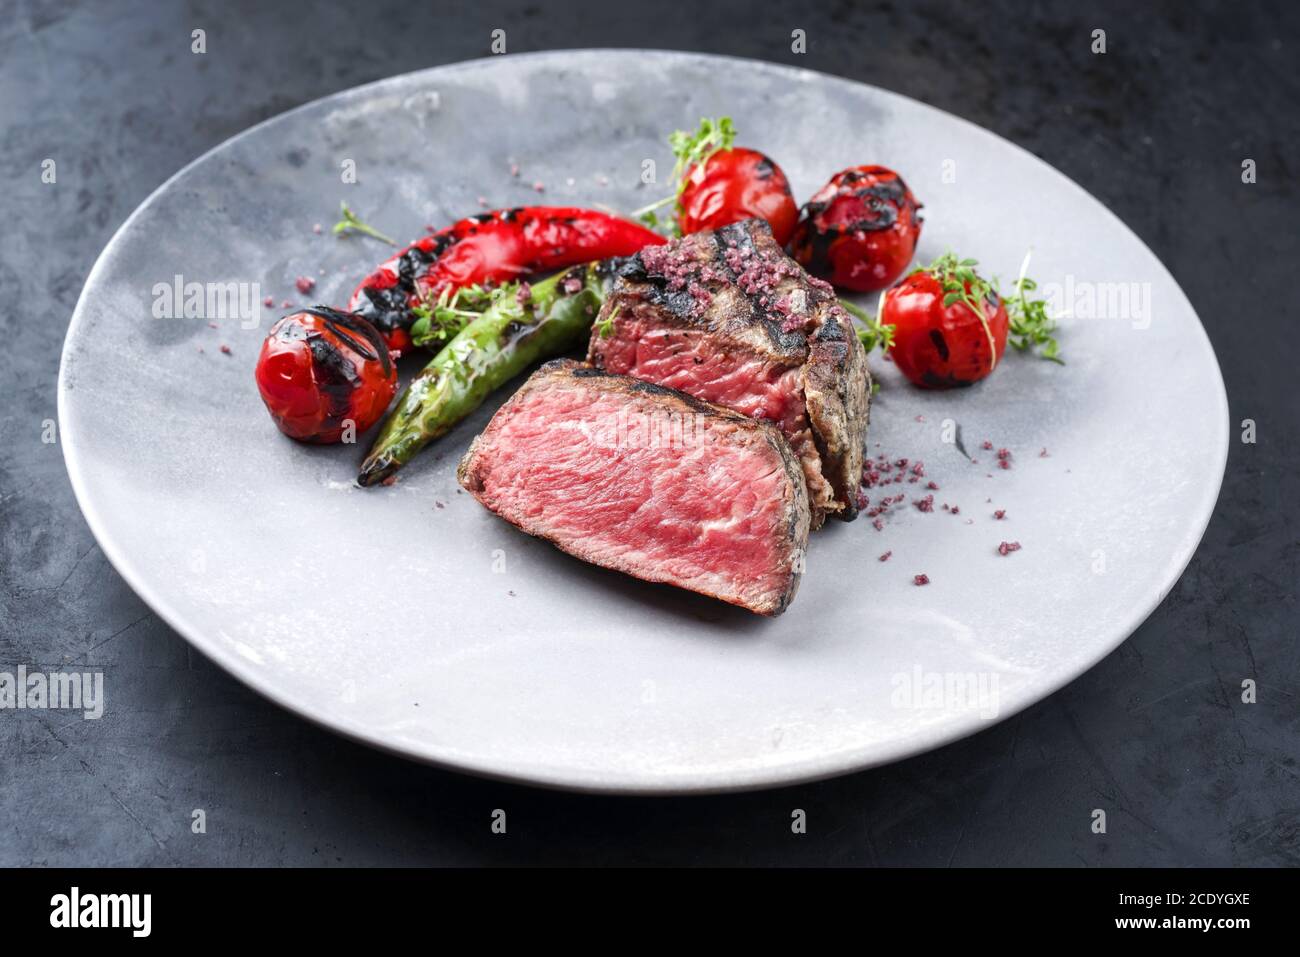 Barbecue dry aged wagyu roast beef steak with tomatoes and chili as closeup on a modern design plate Stock Photo